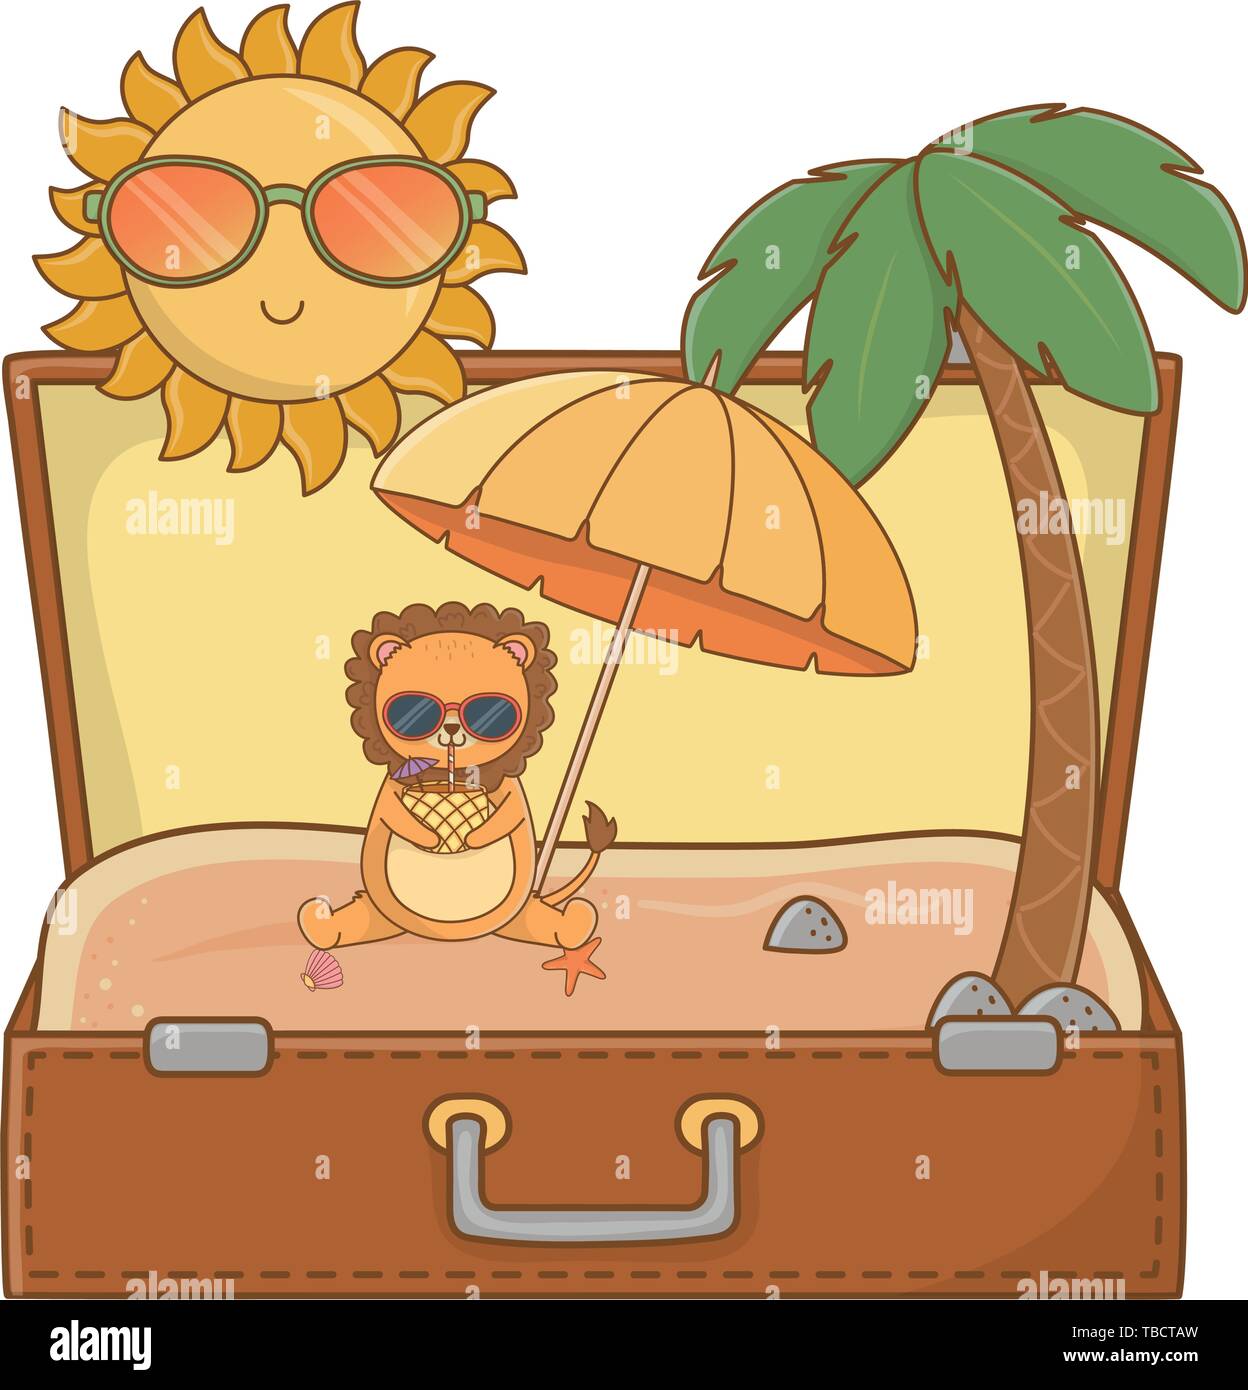 https://c8.alamy.com/comp/TBCTAW/summer-vacation-relax-time-cute-little-happy-animal-lion-inside-travel-suitcase-with-beach-scene-and-sand-floor-with-beach-palm-and-sun-umbrella-with-sun-wearing-sunglasses-cartoon-vector-illustration-graphic-design-TBCTAW.jpg